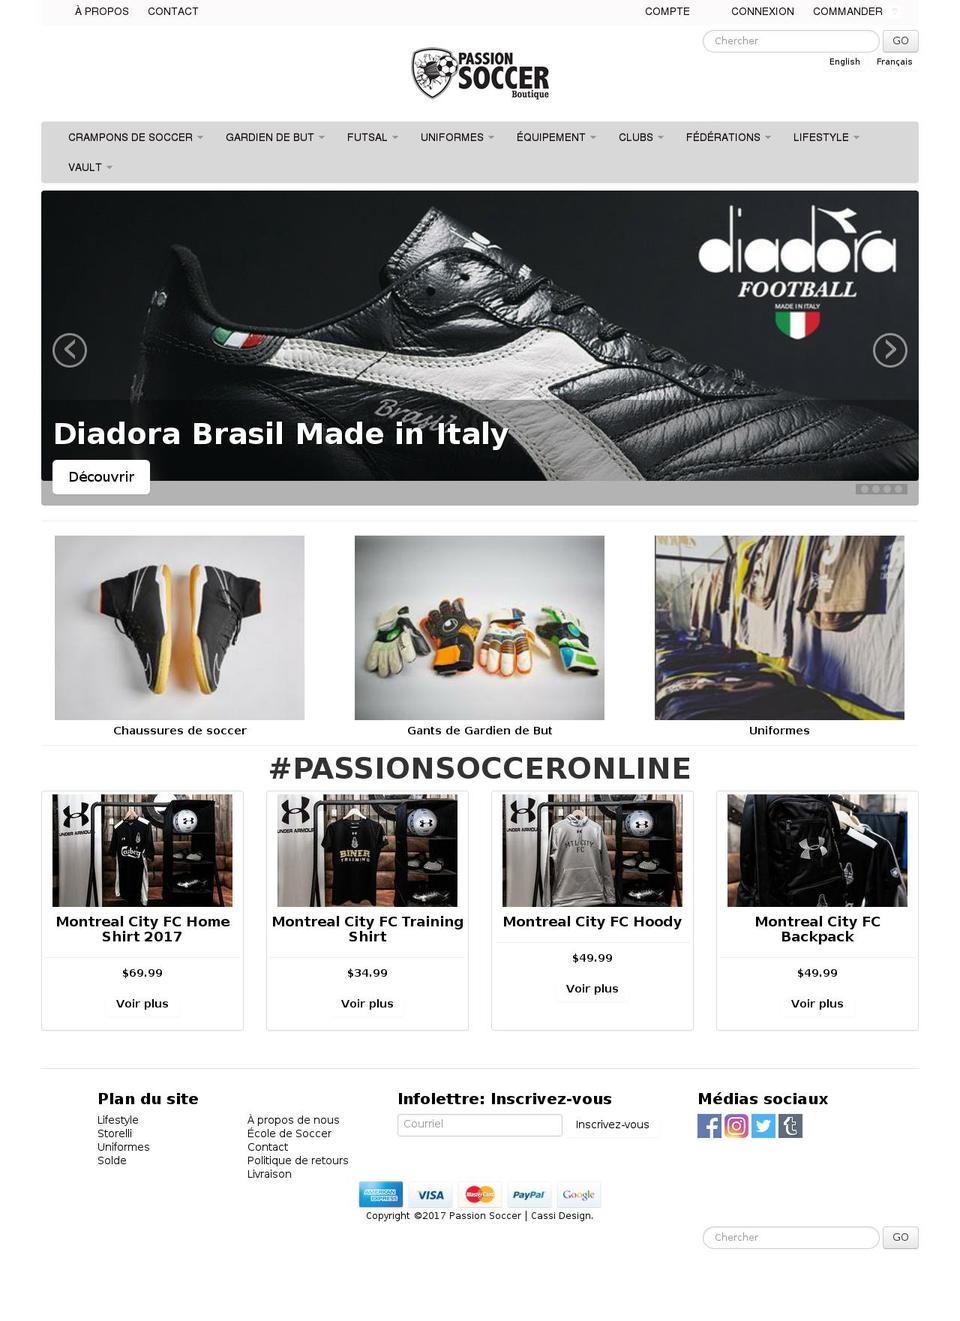 ShowTime Shopify theme site example passionsoccer.ca